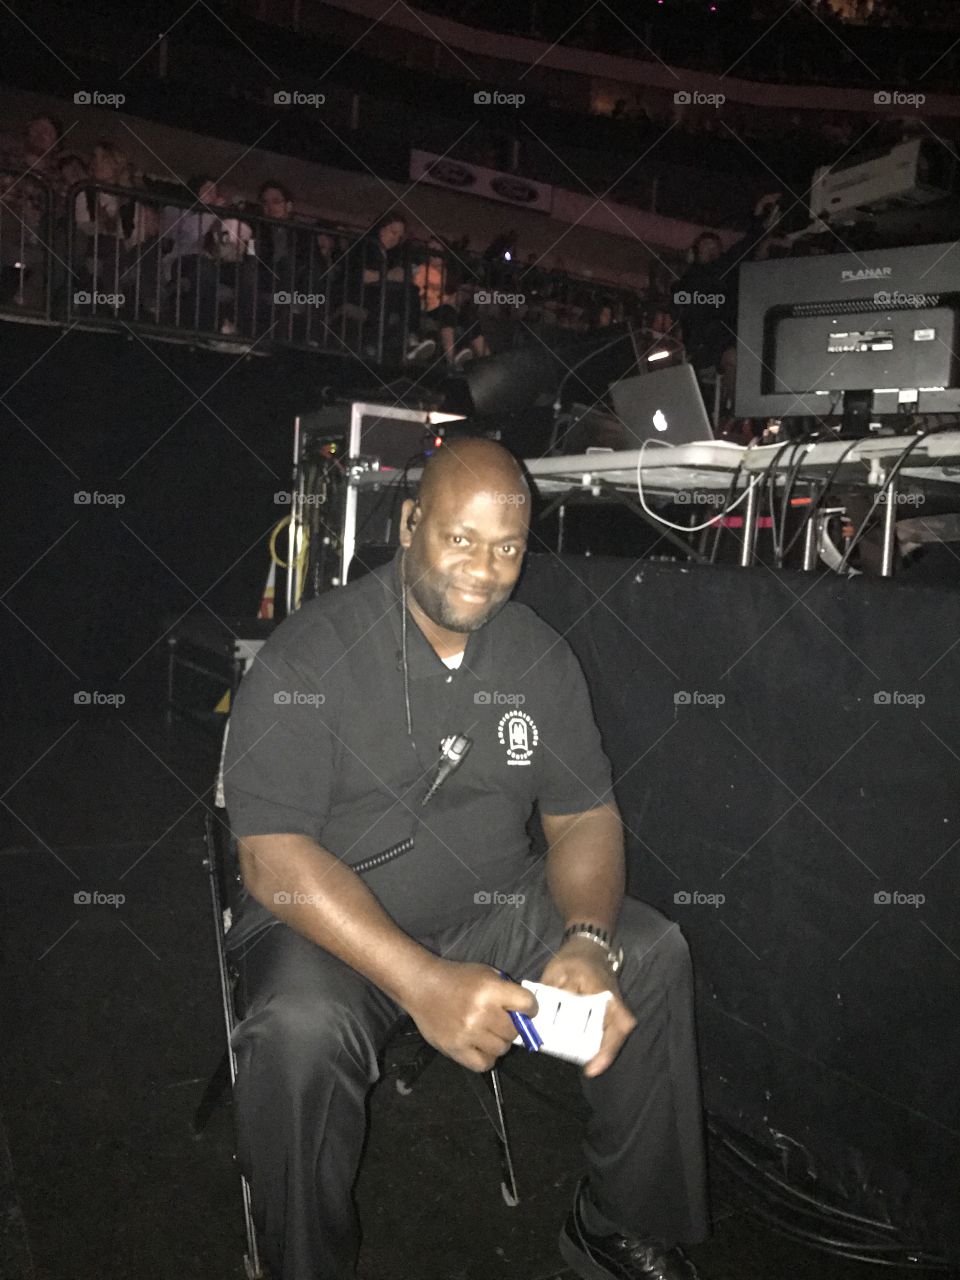 Awesome Security Guy at Jingle Ball